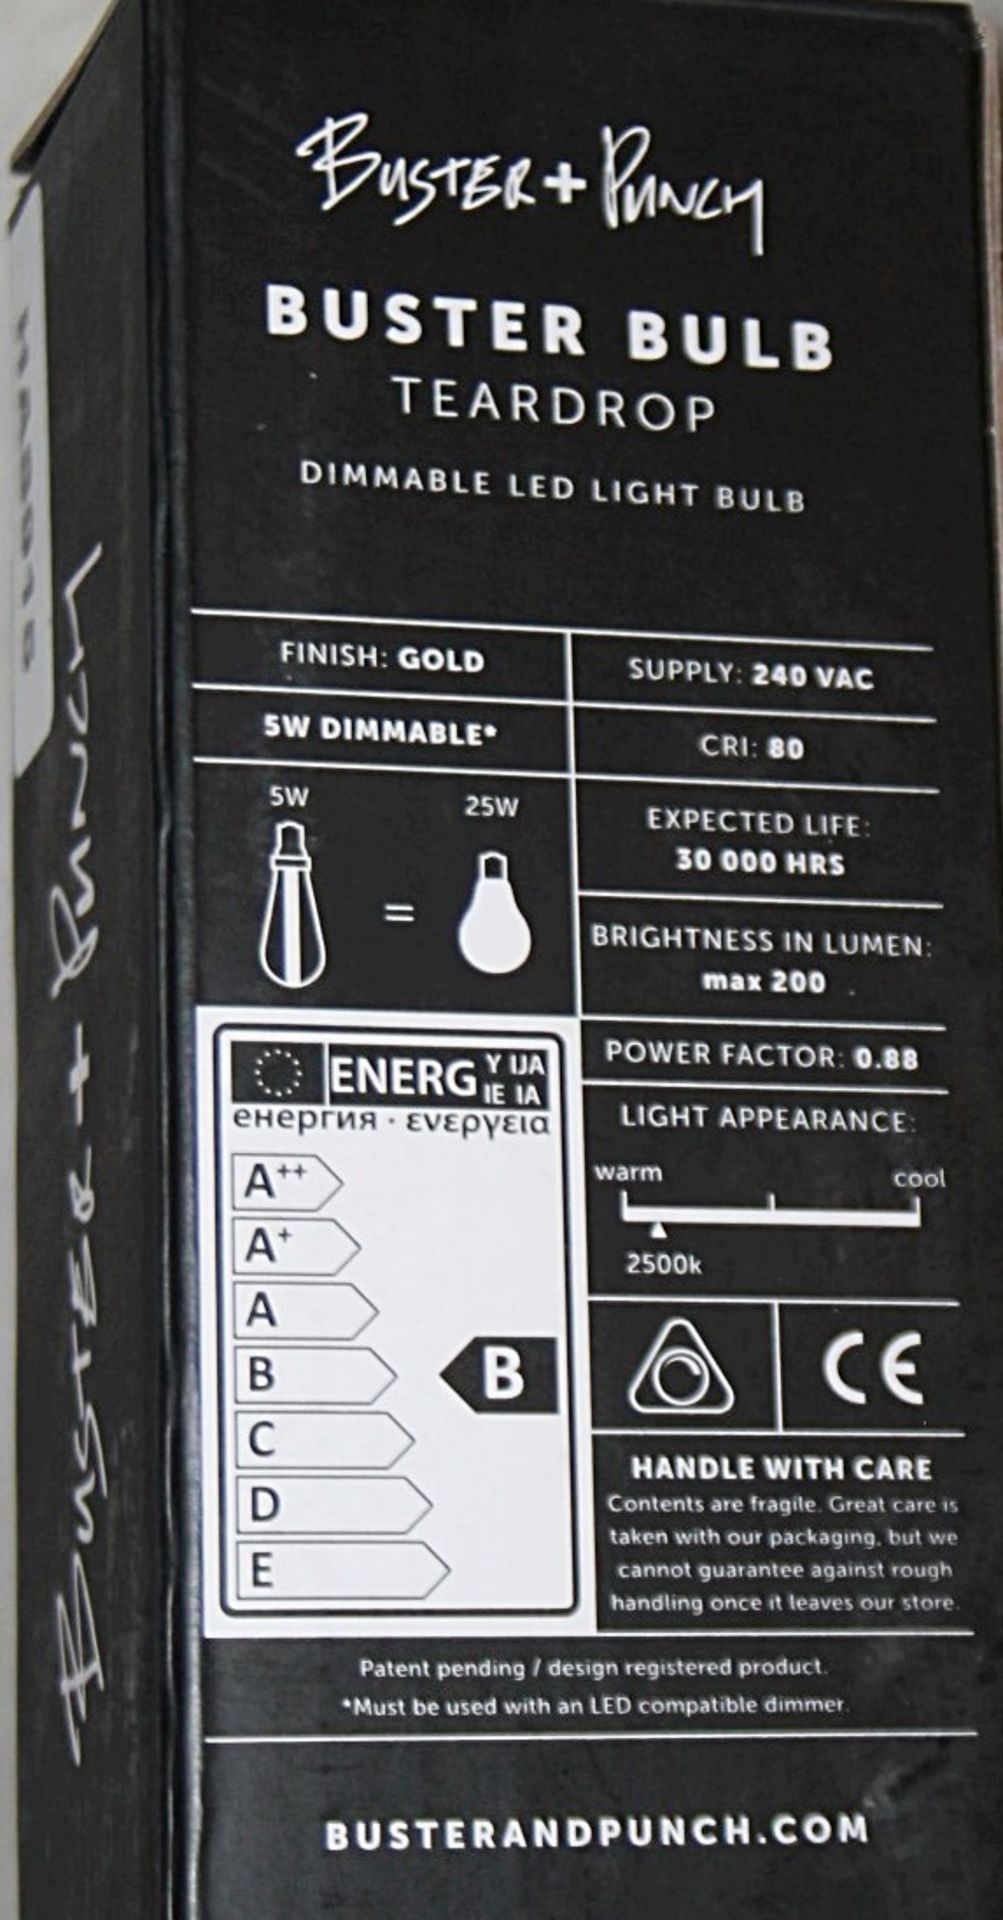 2 x BUSTER + PUNCH Designer Dimmable 'Teardrop' E27 Light Bulbs (Gold) - Total Original Price £69.98 - Image 8 of 10